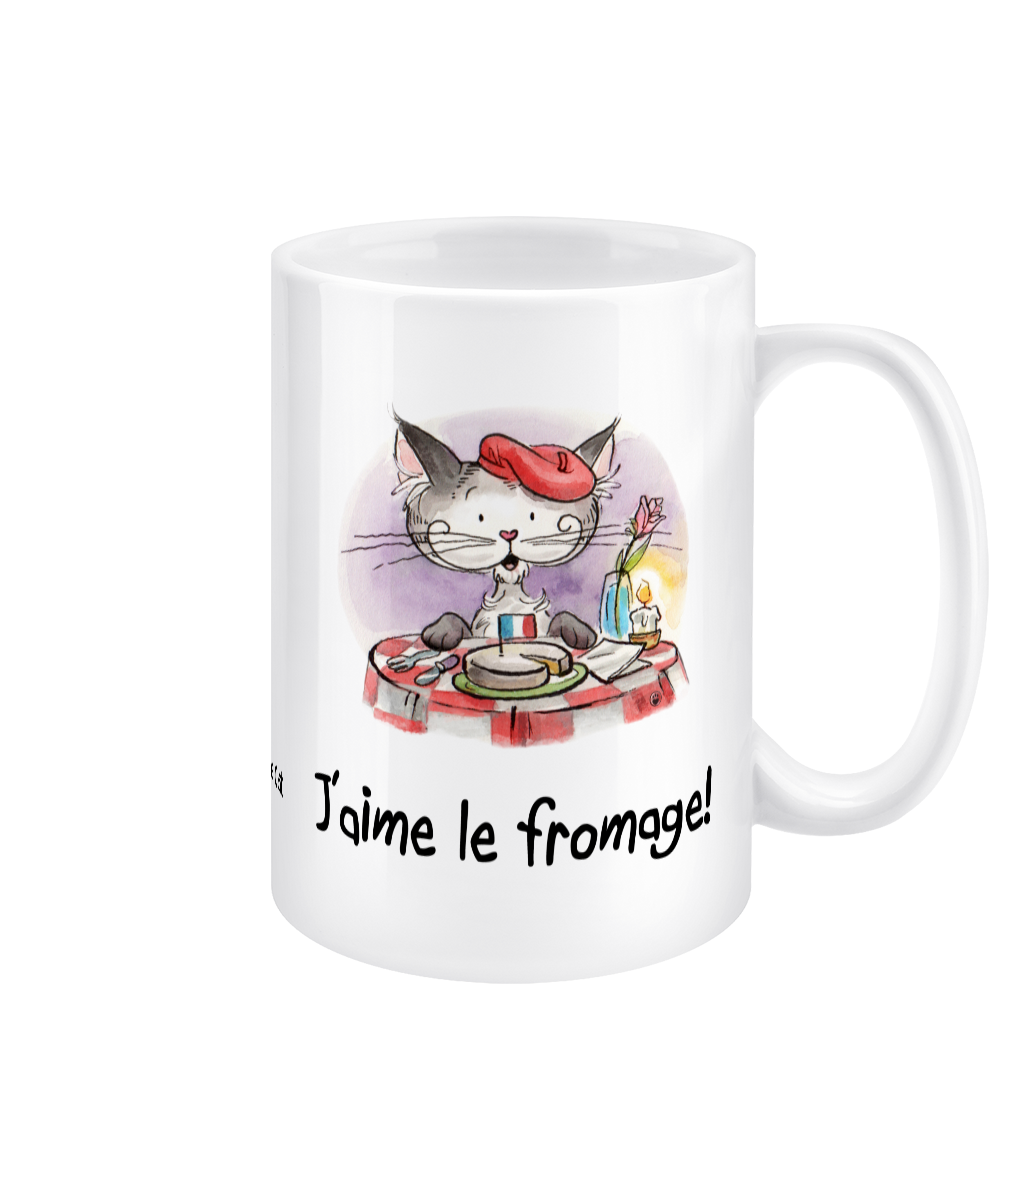 Matisse the Cat 15oz jumbo mug. With the slogan J'aime le fromge. With the handle on the right.